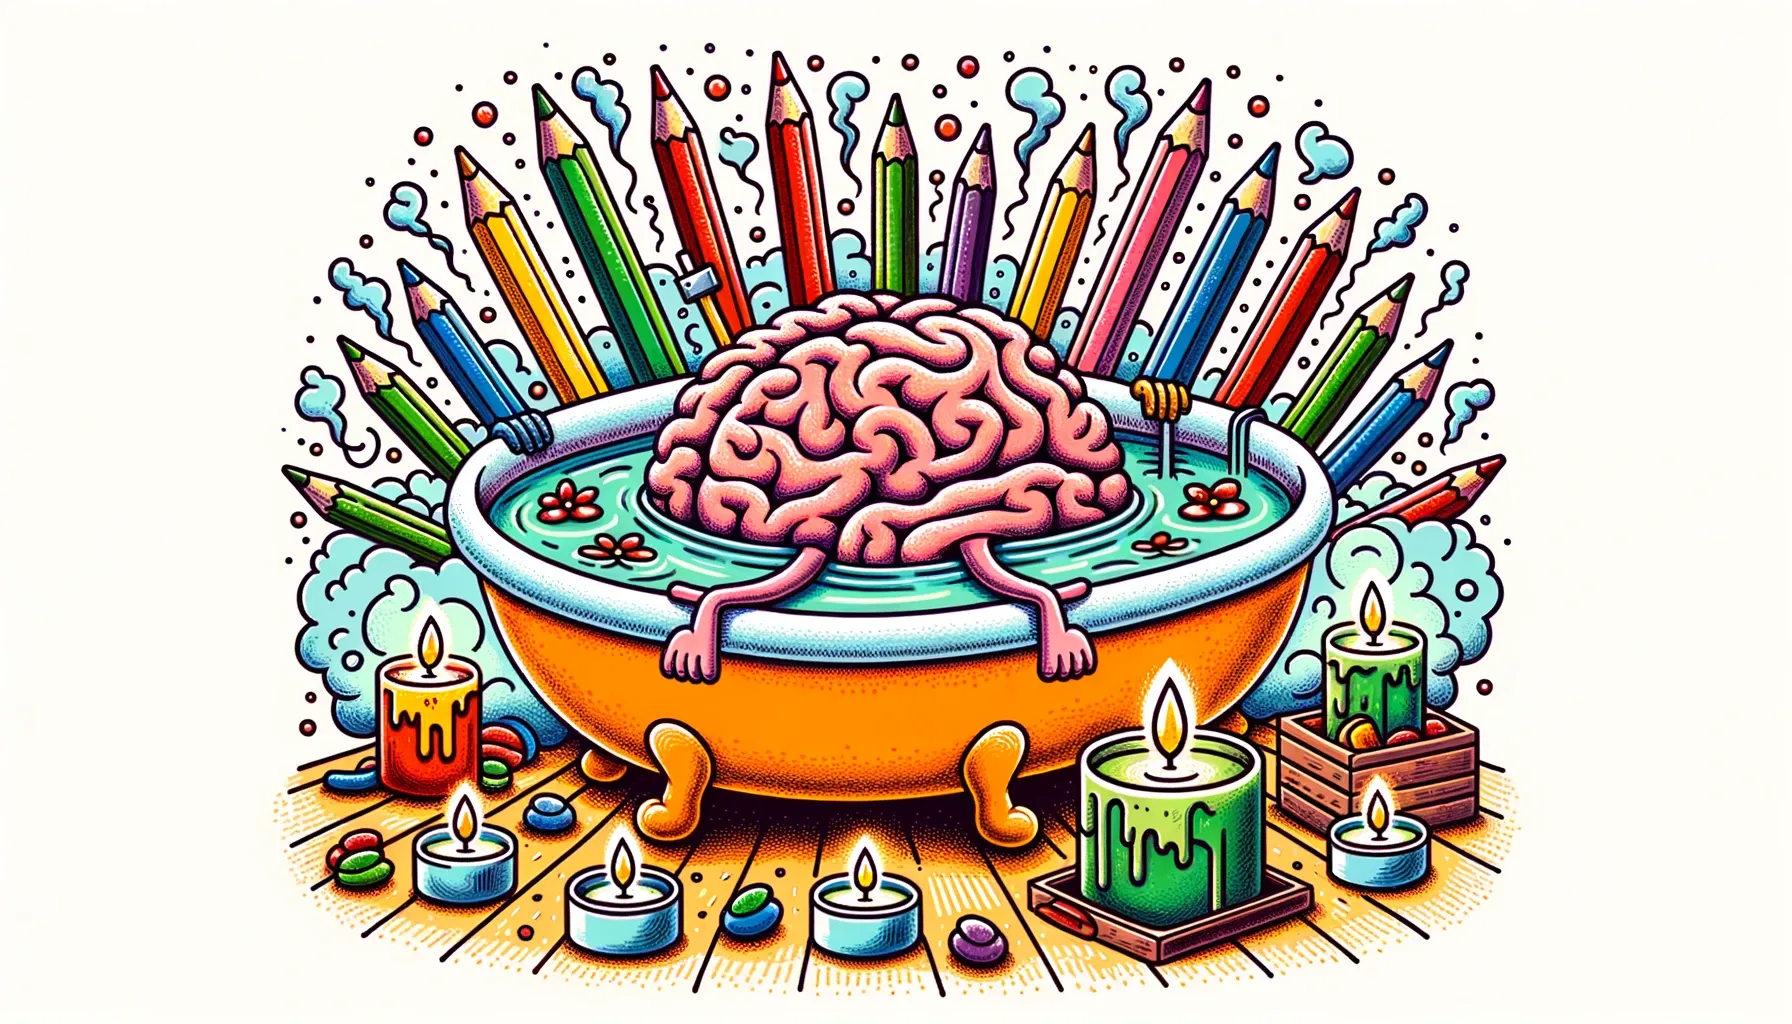 Wide illustration of a brain spa, where crayons and colored pencils enjoy relaxation treatments like massages and aromatherapy. In the center, a brain lounges in a warm bath, surrounded by candles. The doodles are vibrant, childlike, and imbued with a sense of calm.